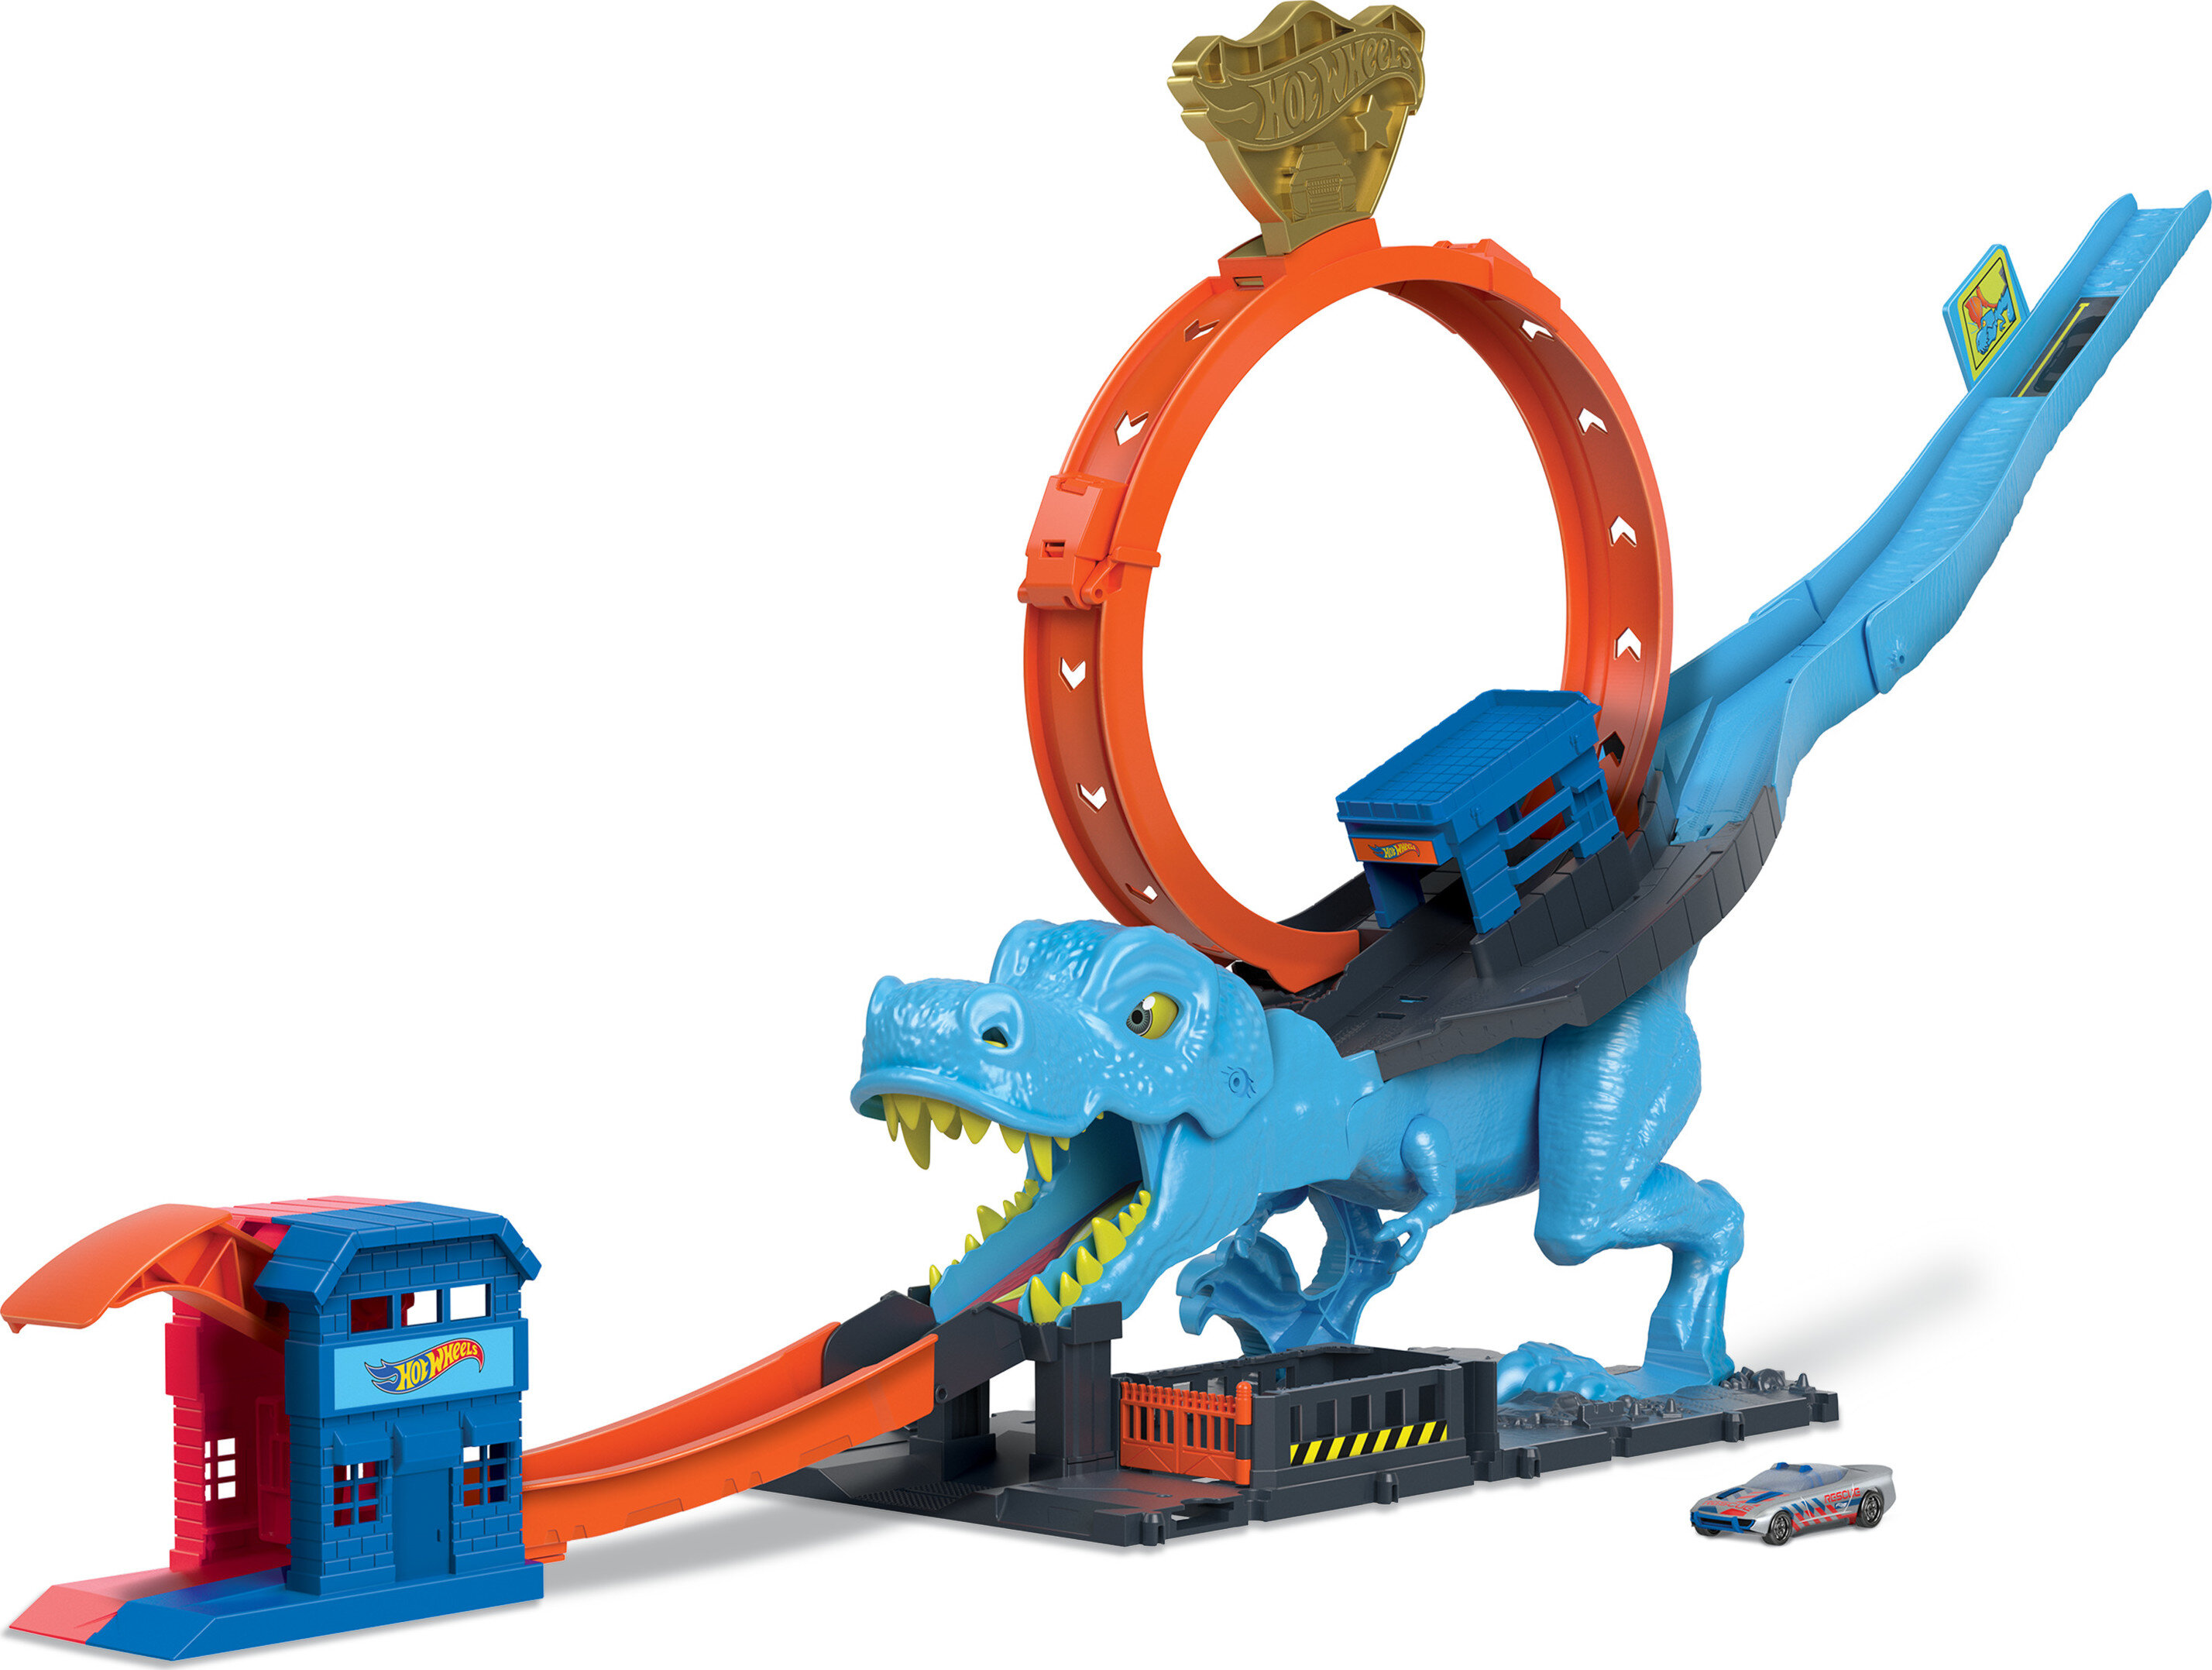 Hot Wheels City T-Rex Dinosaur Chomp-Down Track Set with a Huge Loop & 1:64 Scale Toy Car for Age 3 - 5 - image 1 of 7